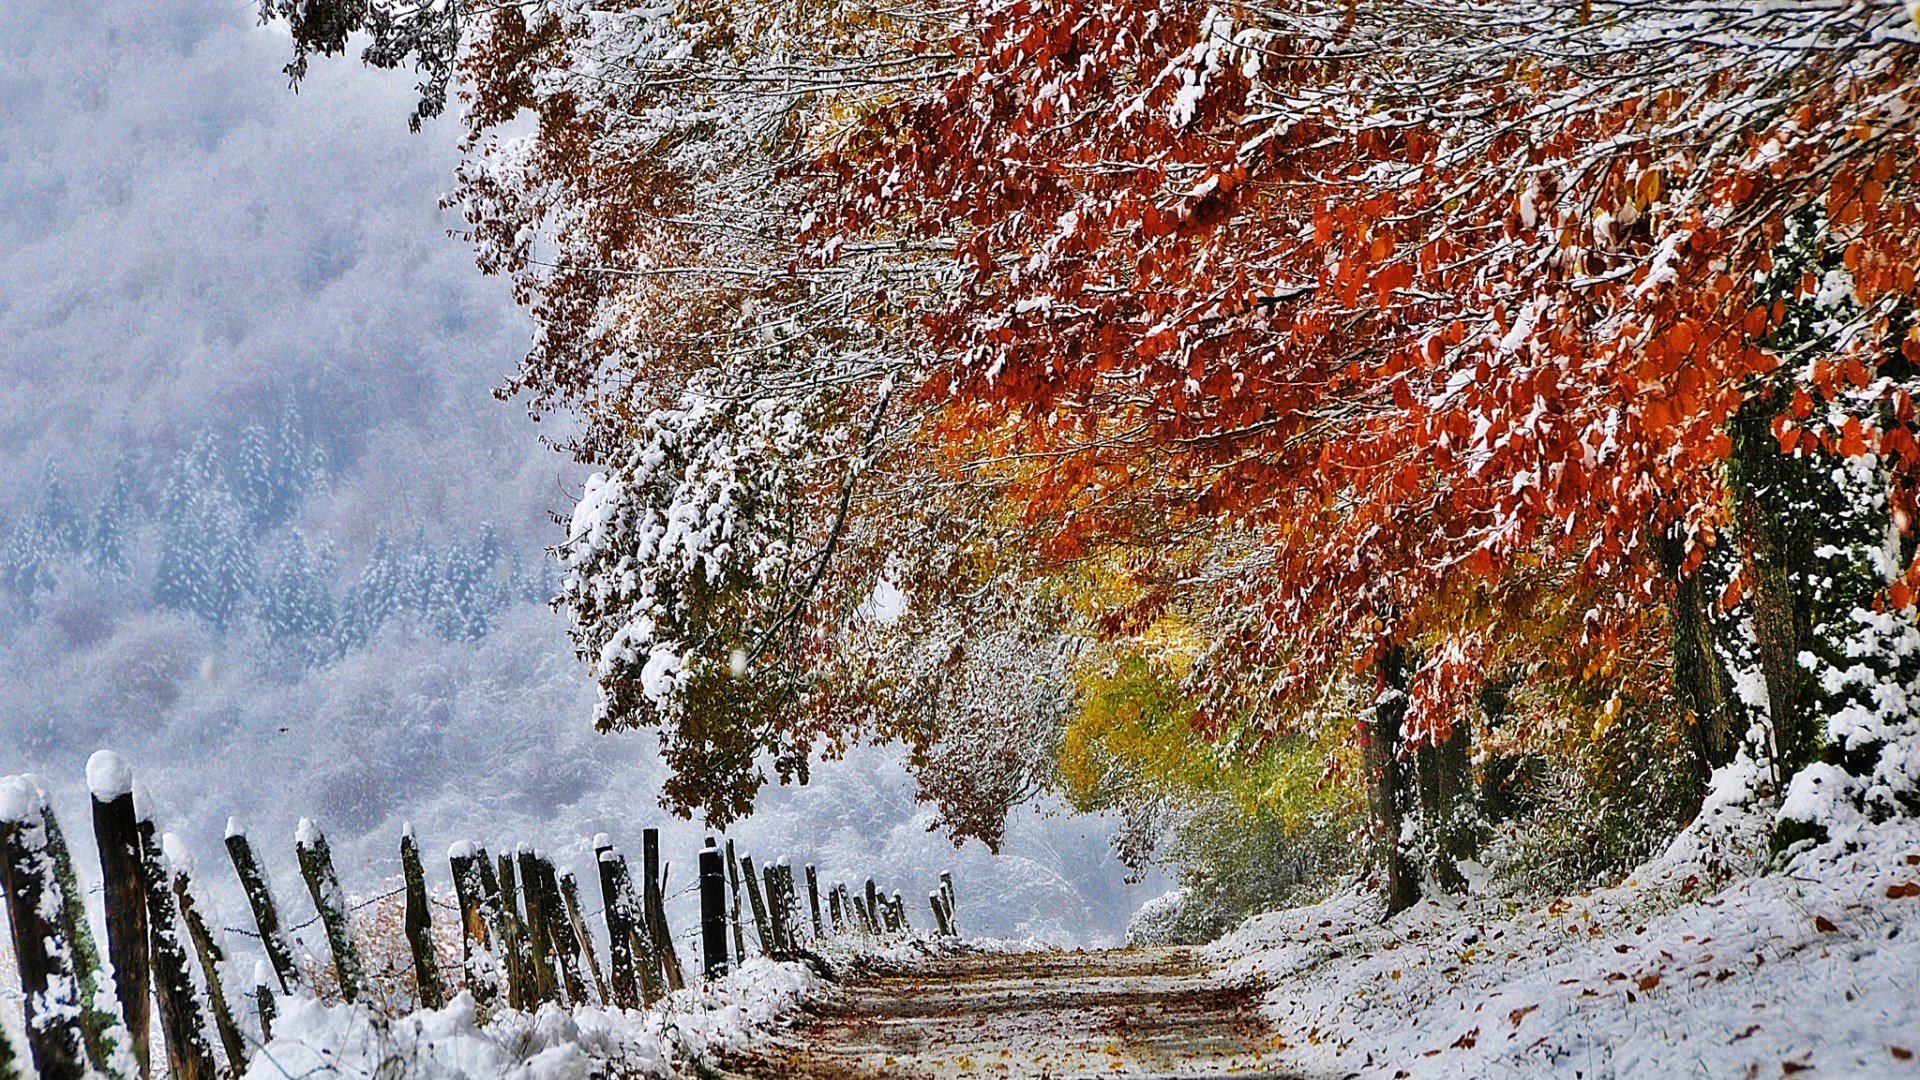 Wallpaper Autumn Snow France Trail November Between And